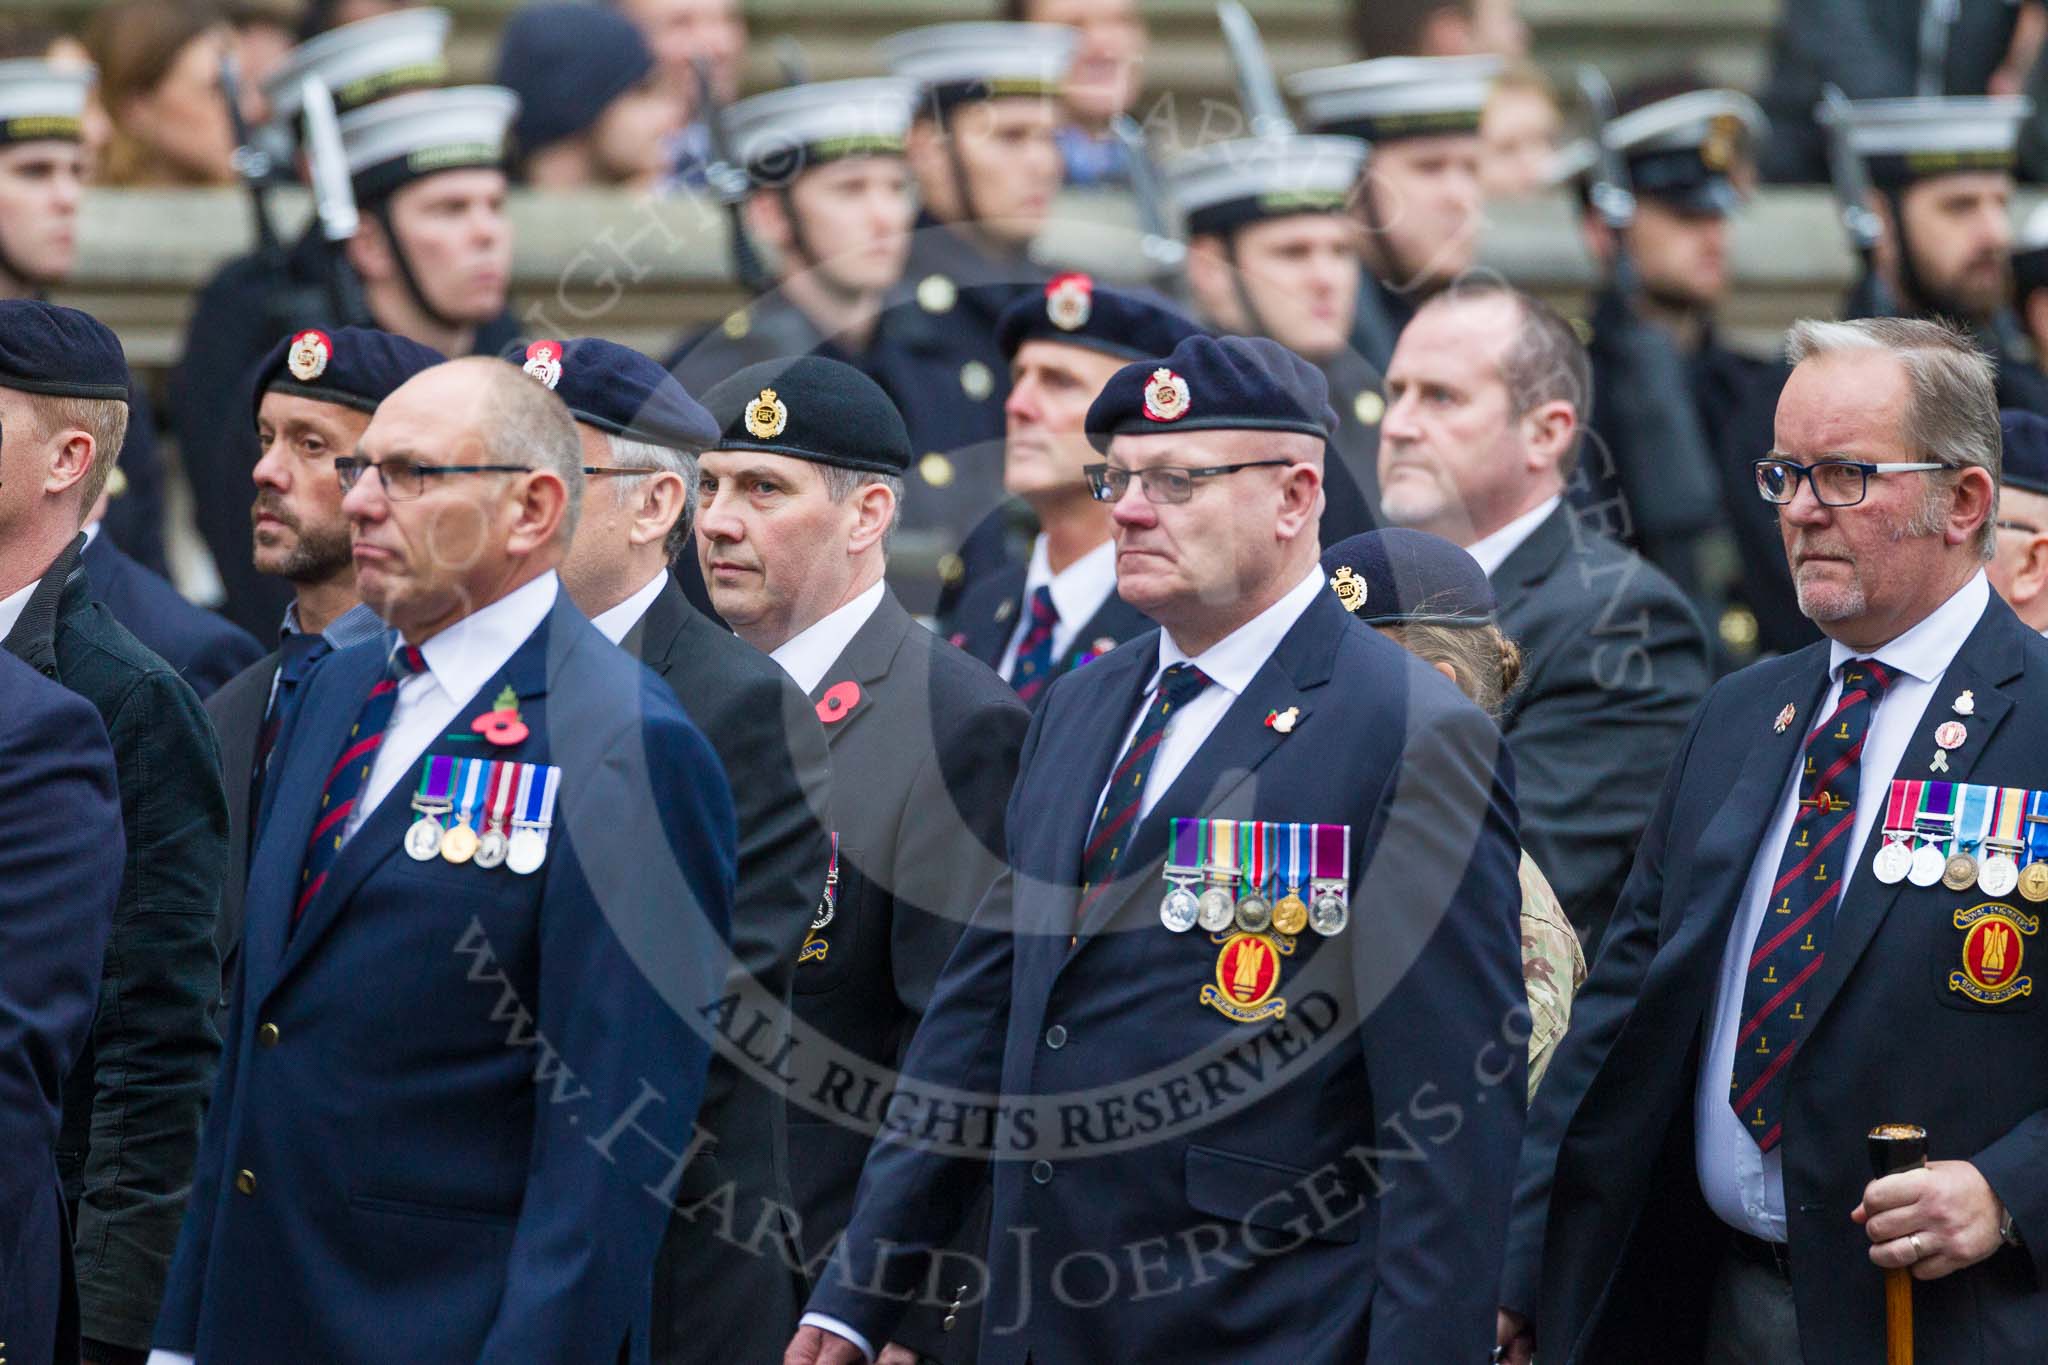 Remembrance Sunday at the Cenotaph 2015: Group B6, Royal Engineers Bomb Disposal Association (Anniversary).
Cenotaph, Whitehall, London SW1,
London,
Greater London,
United Kingdom,
on 08 November 2015 at 11:37, image #52